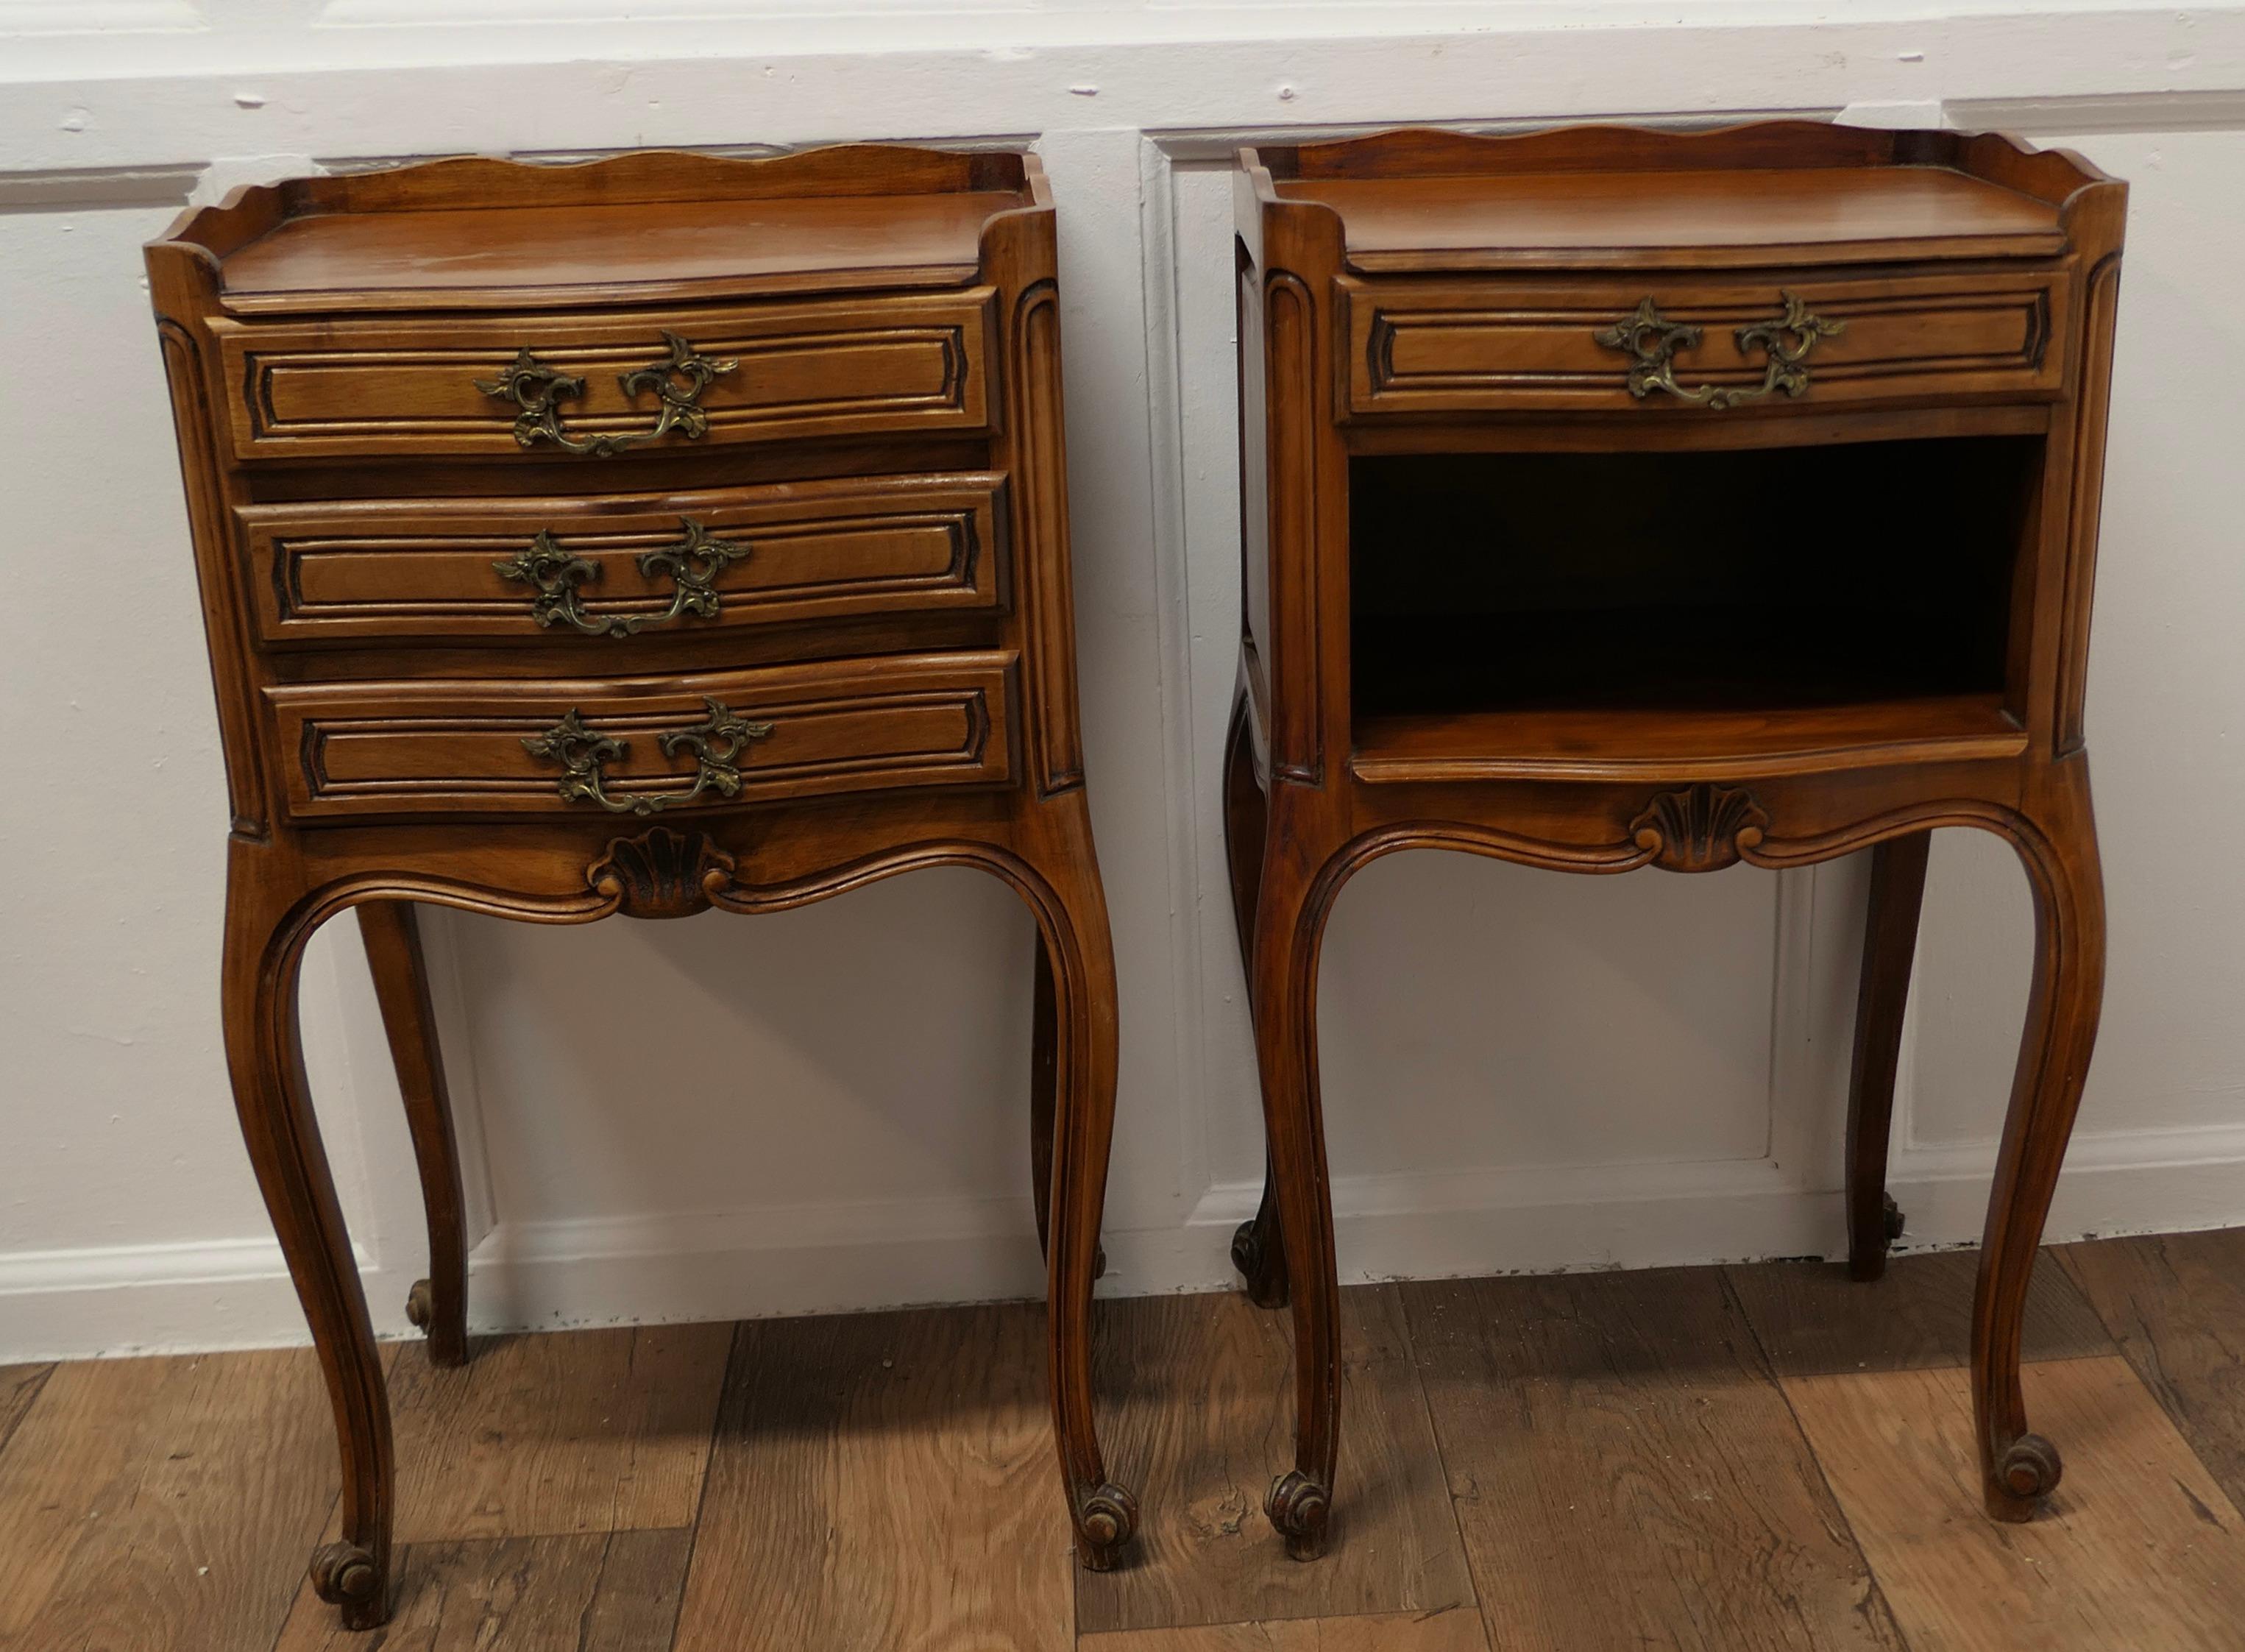 Pair of French Cherry Wood Bedside Cabinets or Cupboards

This is a pretty pair of cabinets or chevets, they have a slightly bow front shape to their fronts and a scalloped gallery around the top, they stand on very elegant cabriole legs with